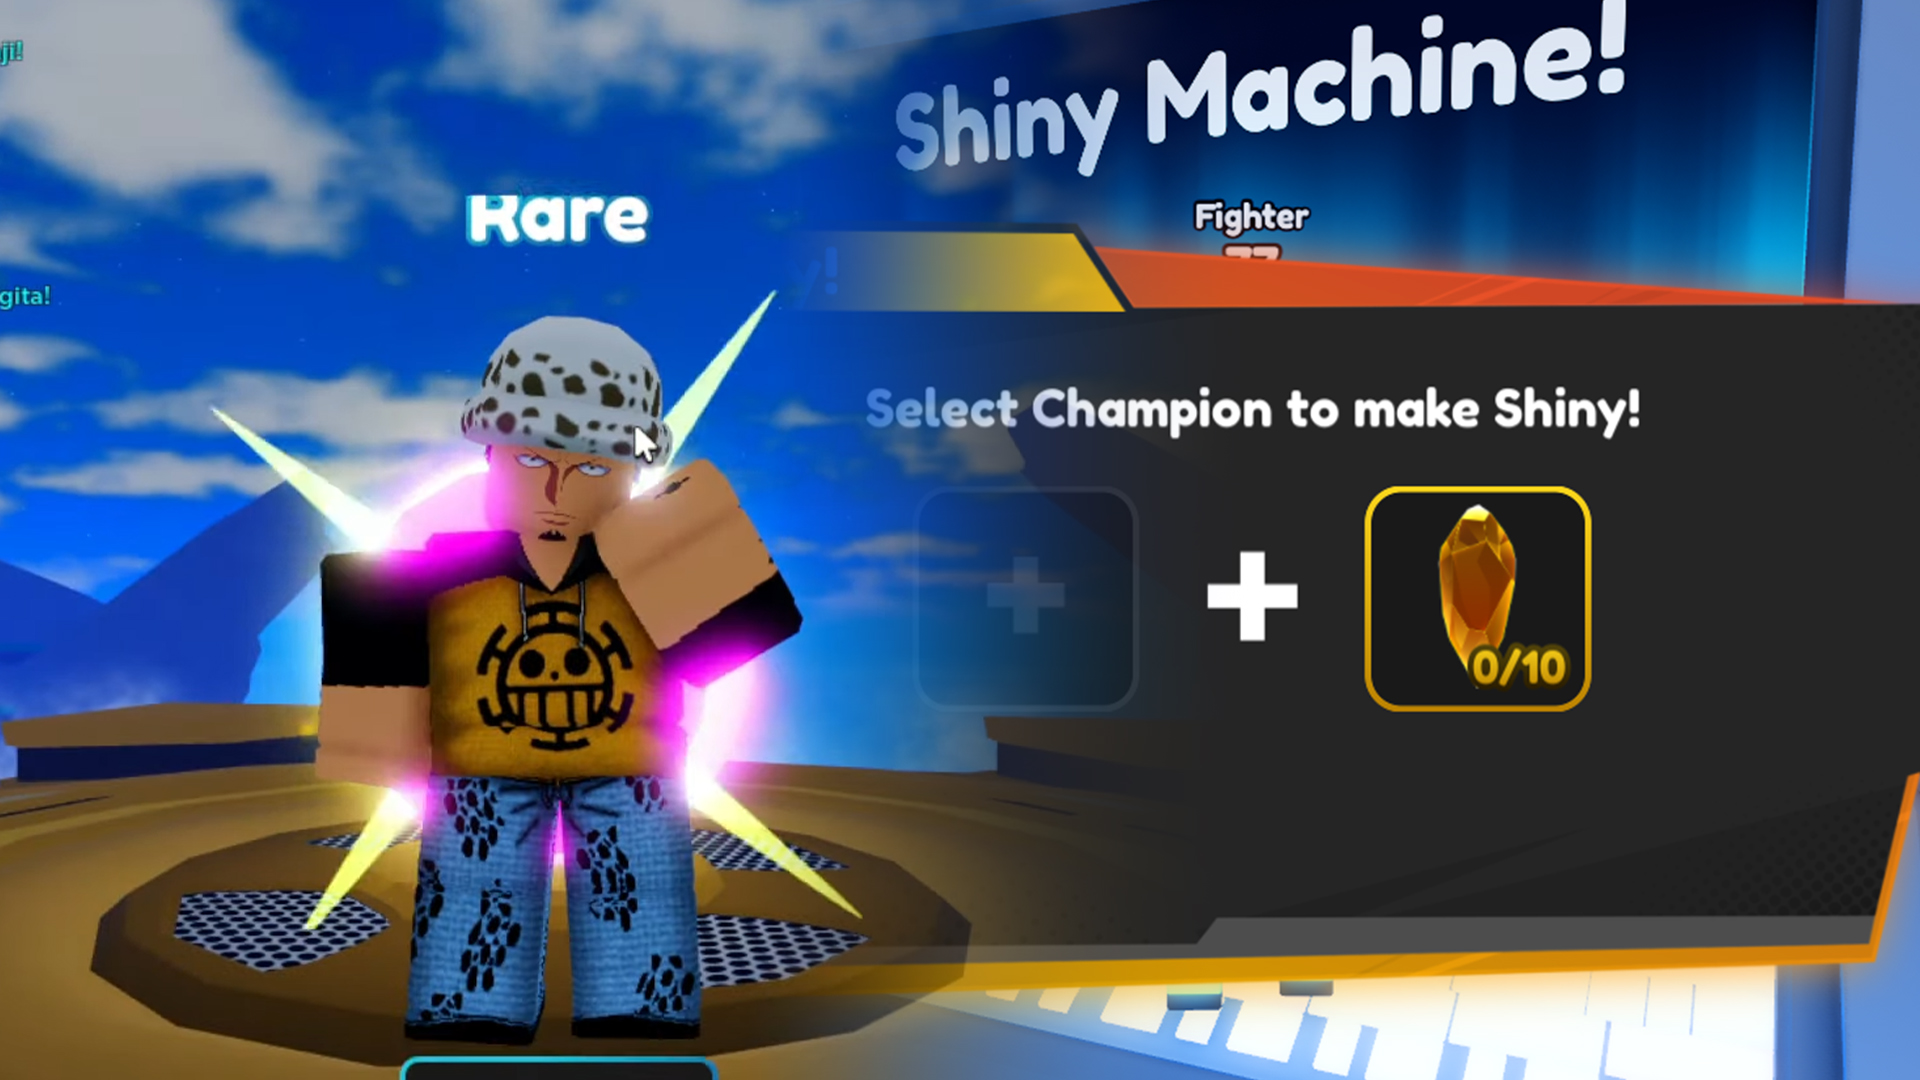 I Got The BEST SHINY CRAFTED FIGHTER In Anime Fighters Simulator